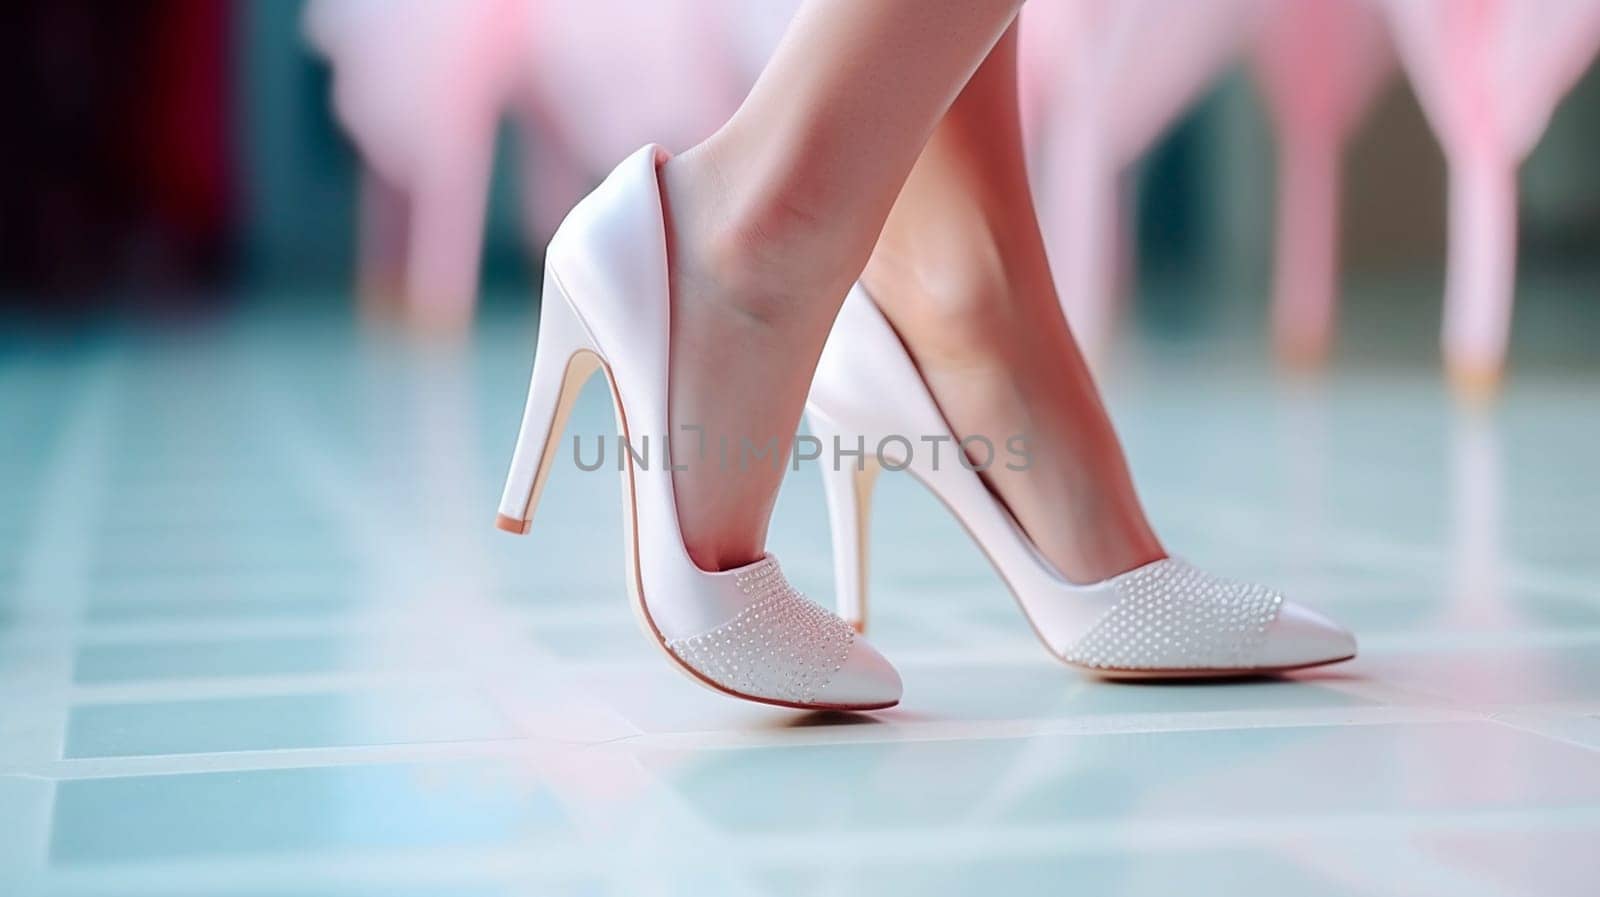 bride's feet in white shoes. Selective focus. people.